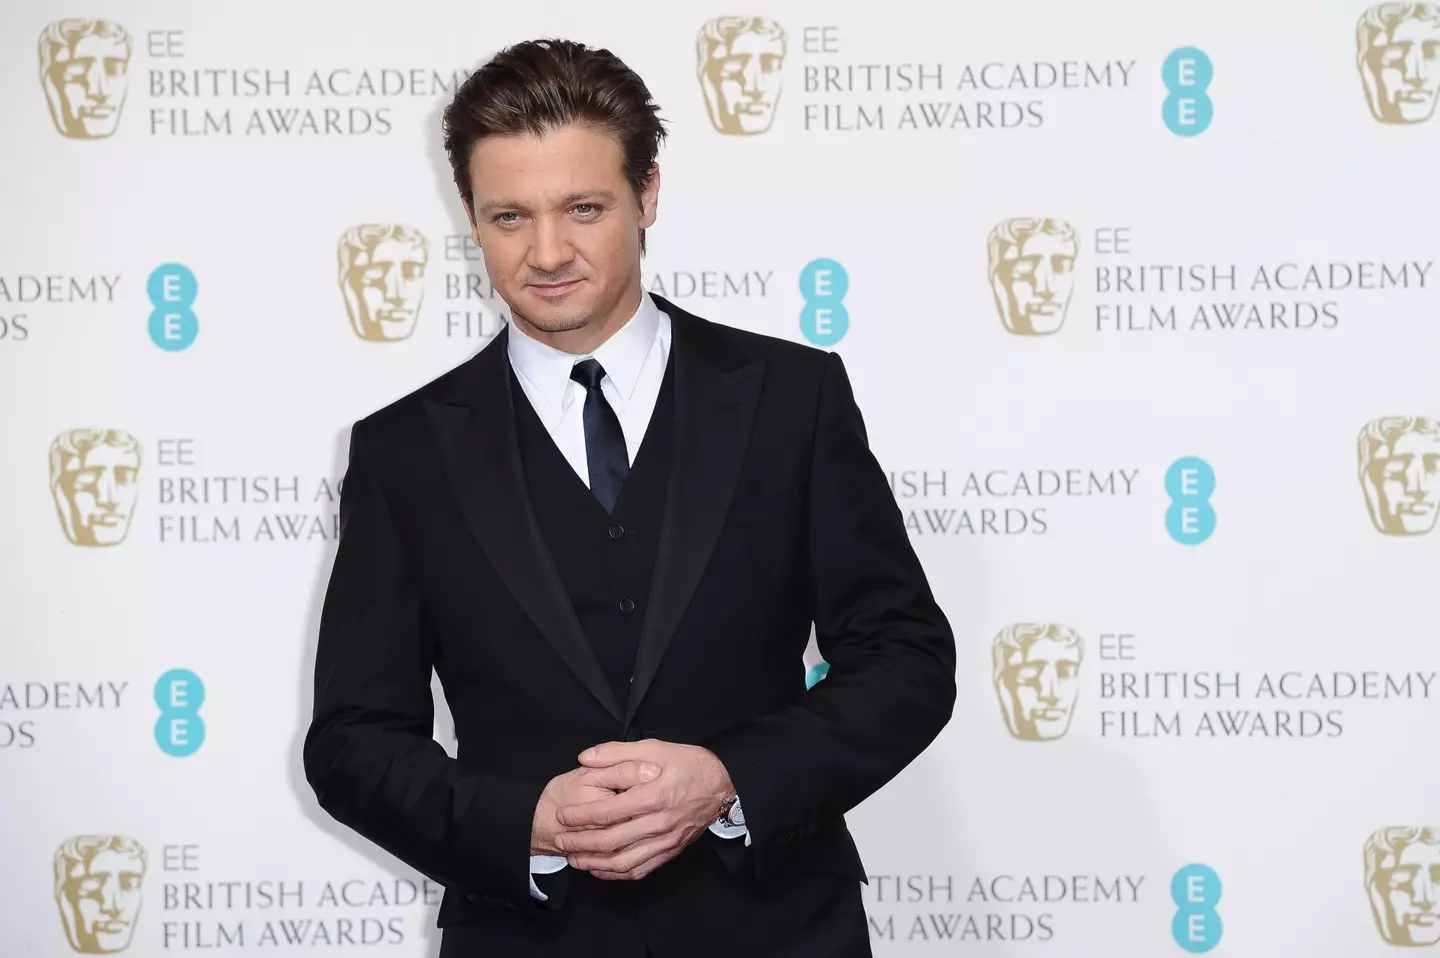 Renner is in a 'critical but stable' condition.